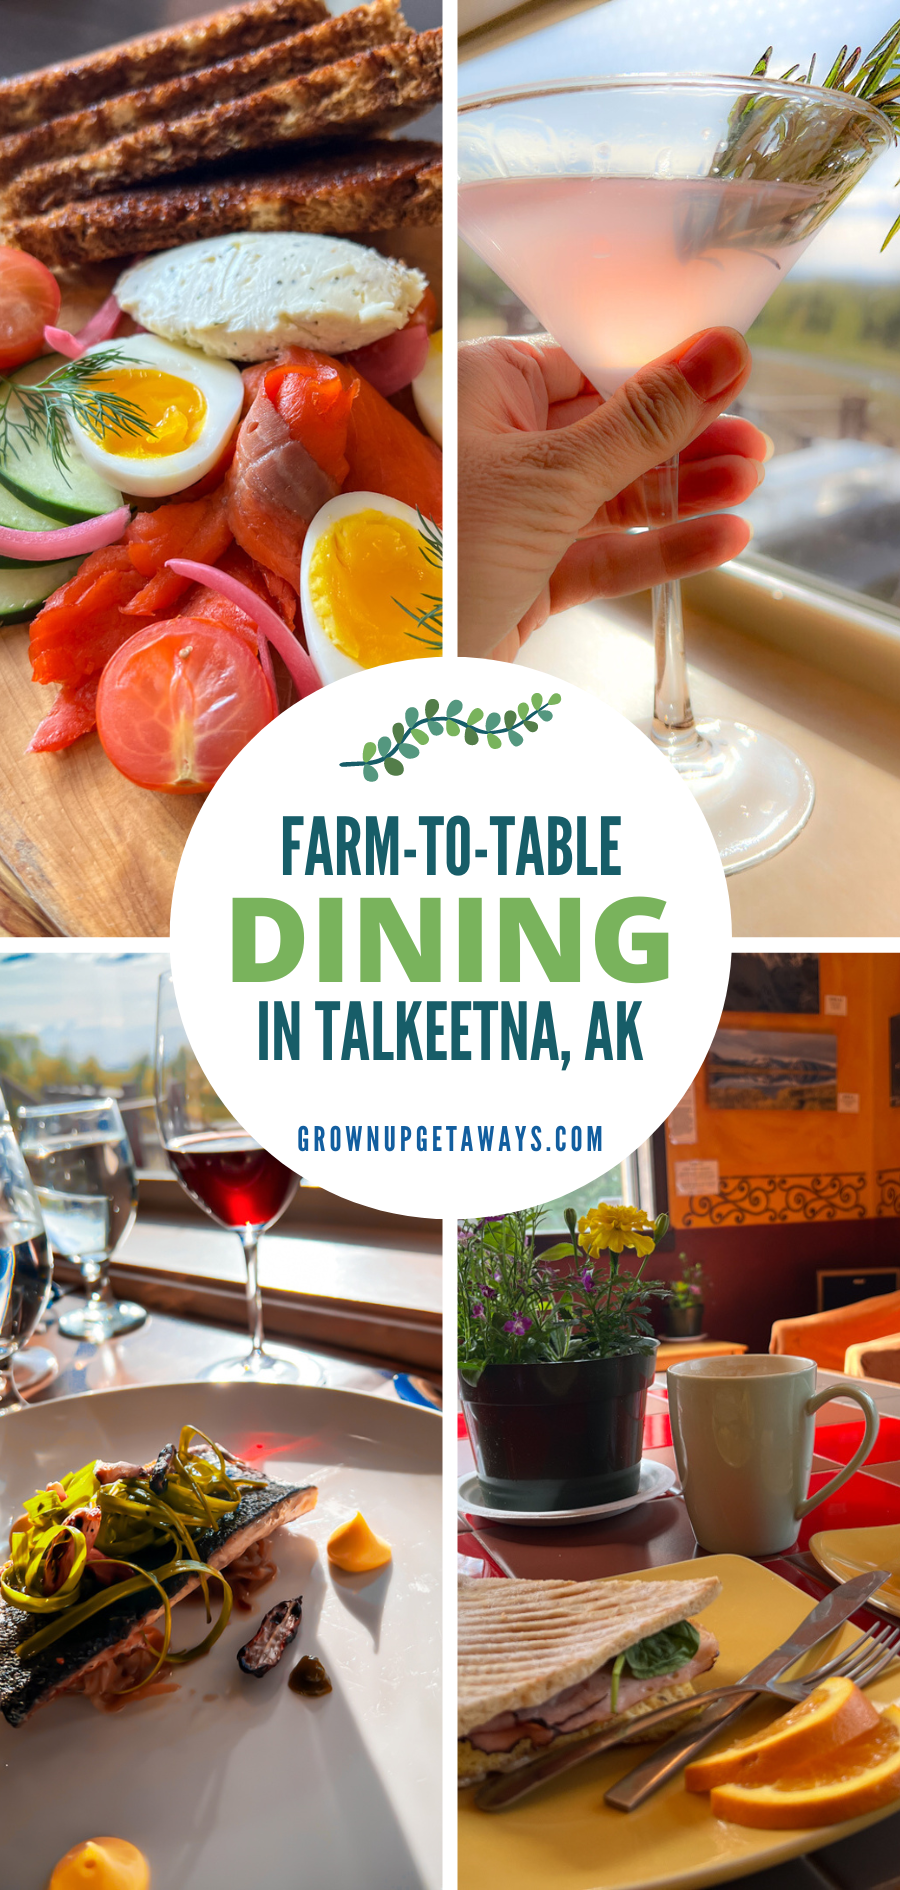 Farm to Table Dining in Talkeetna, AK